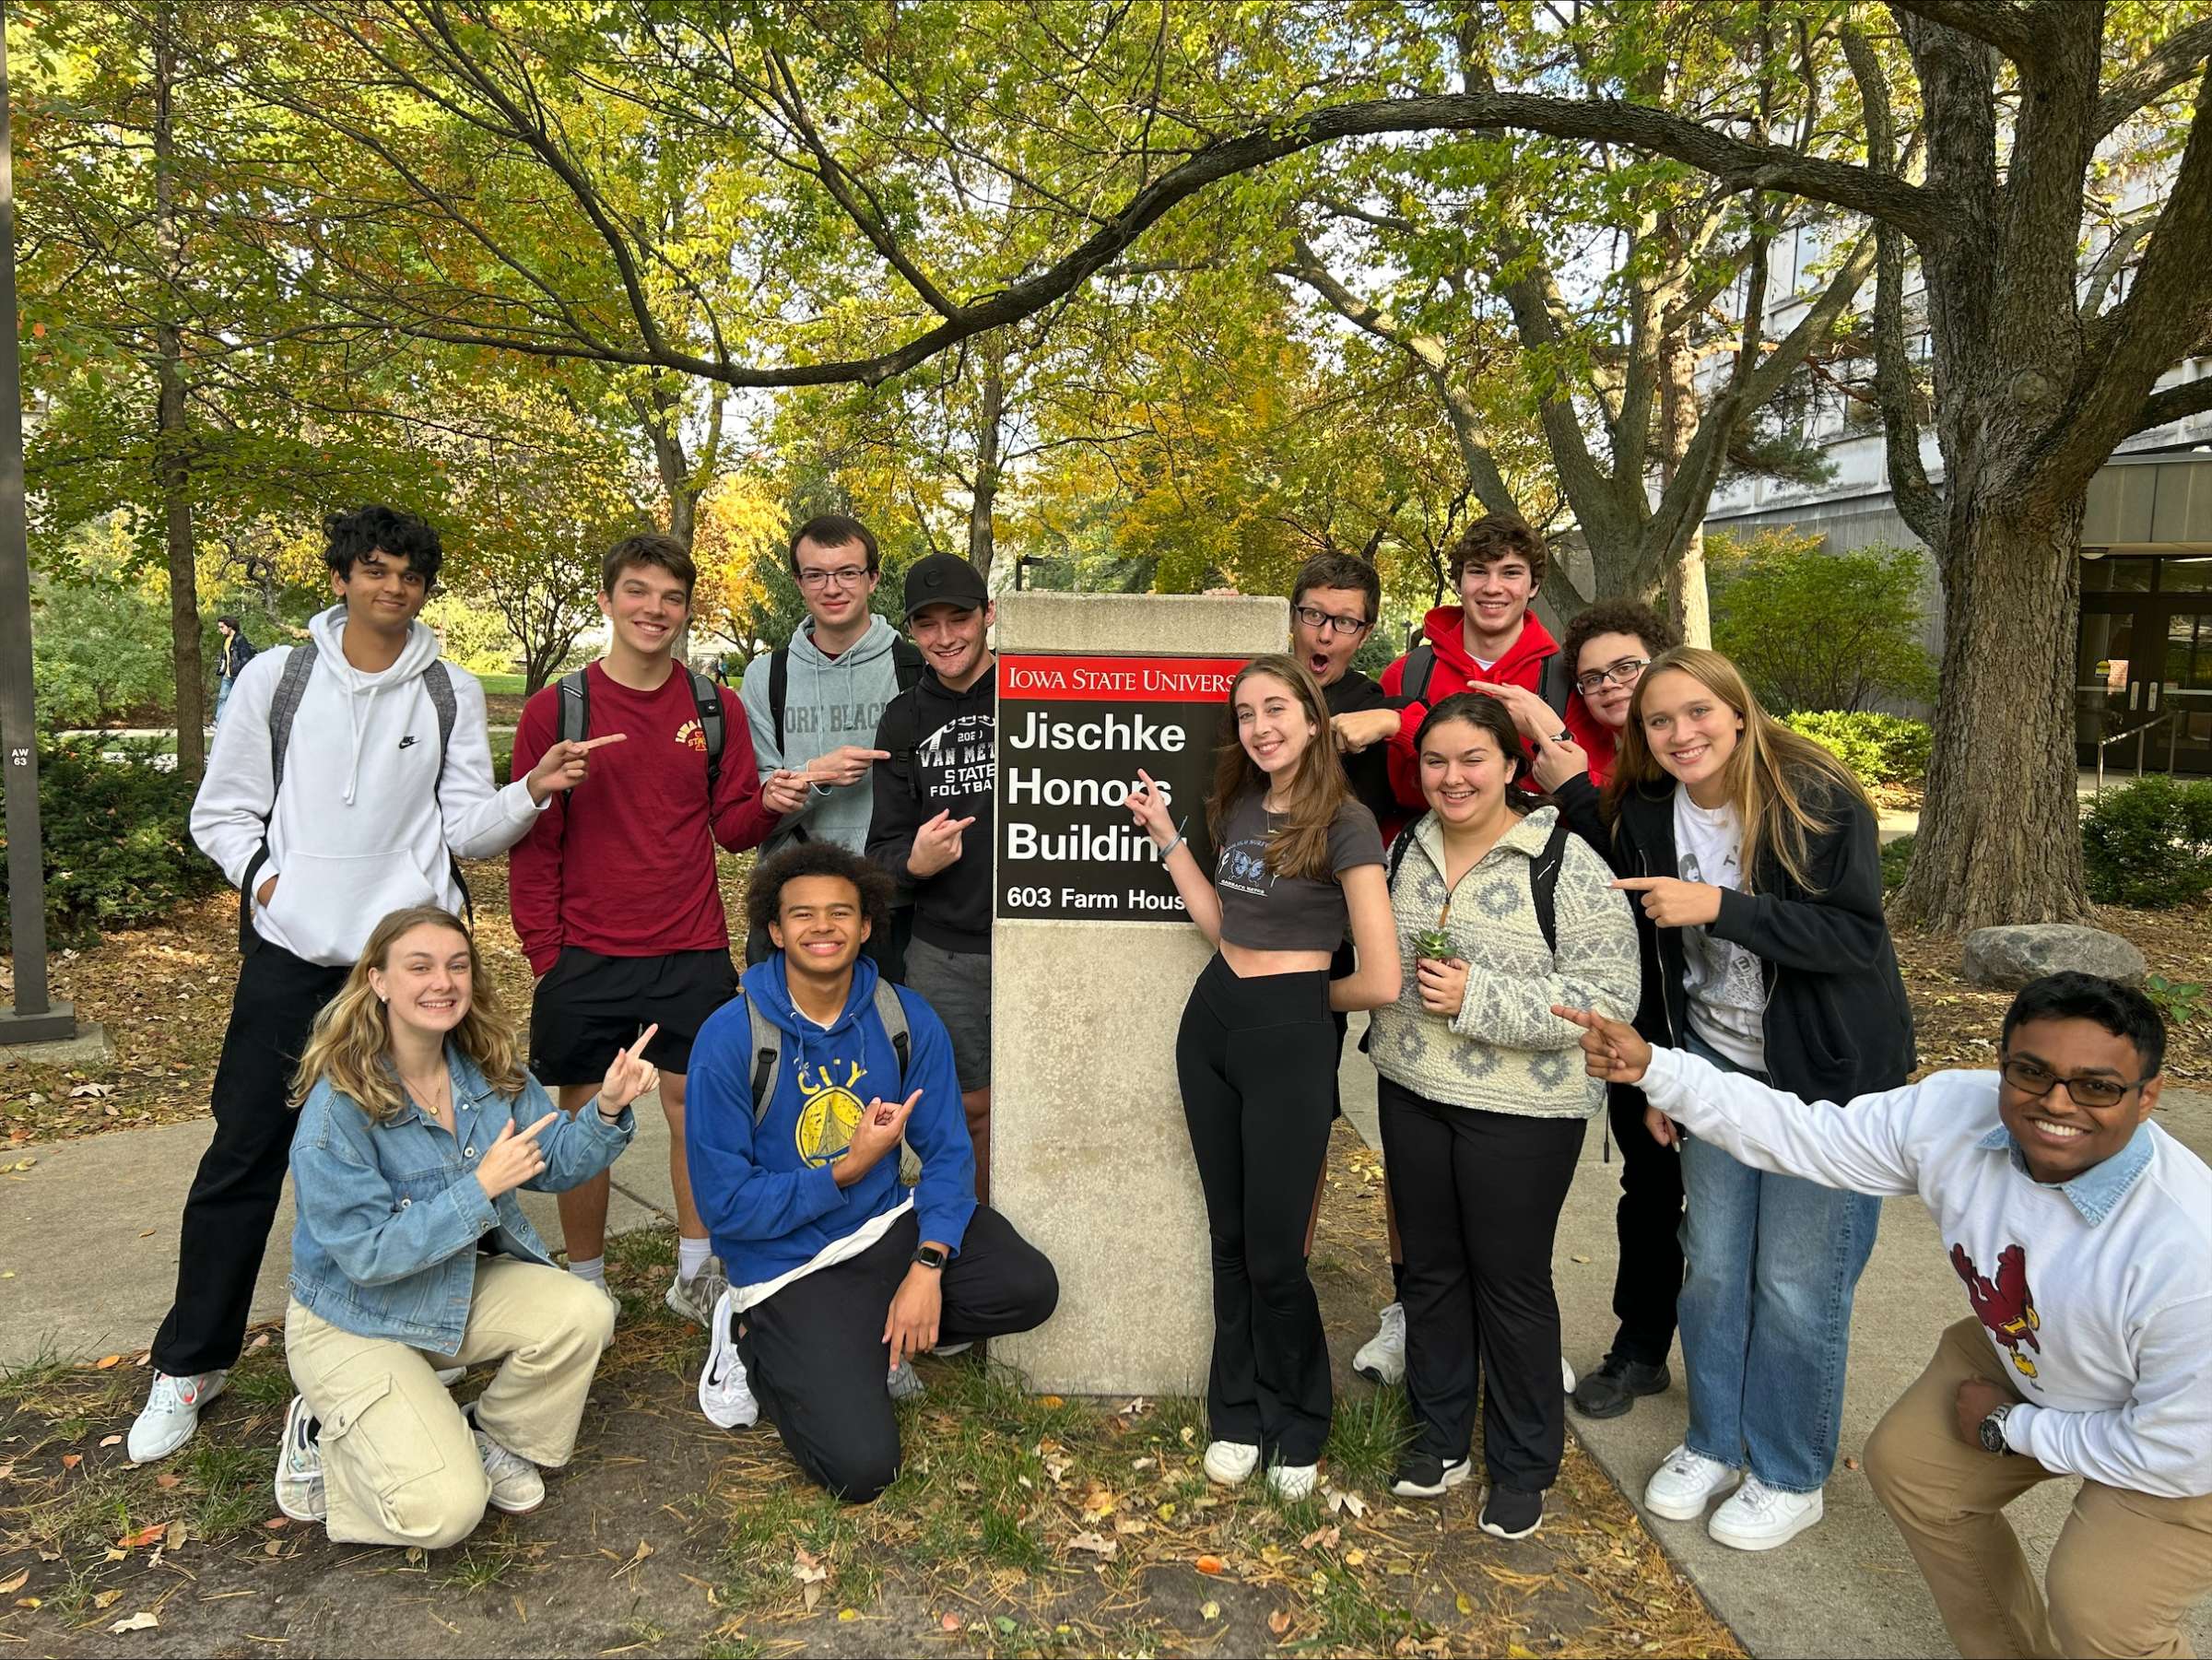 Honors 121 class posing in front of the Jischke Honors Building sign.